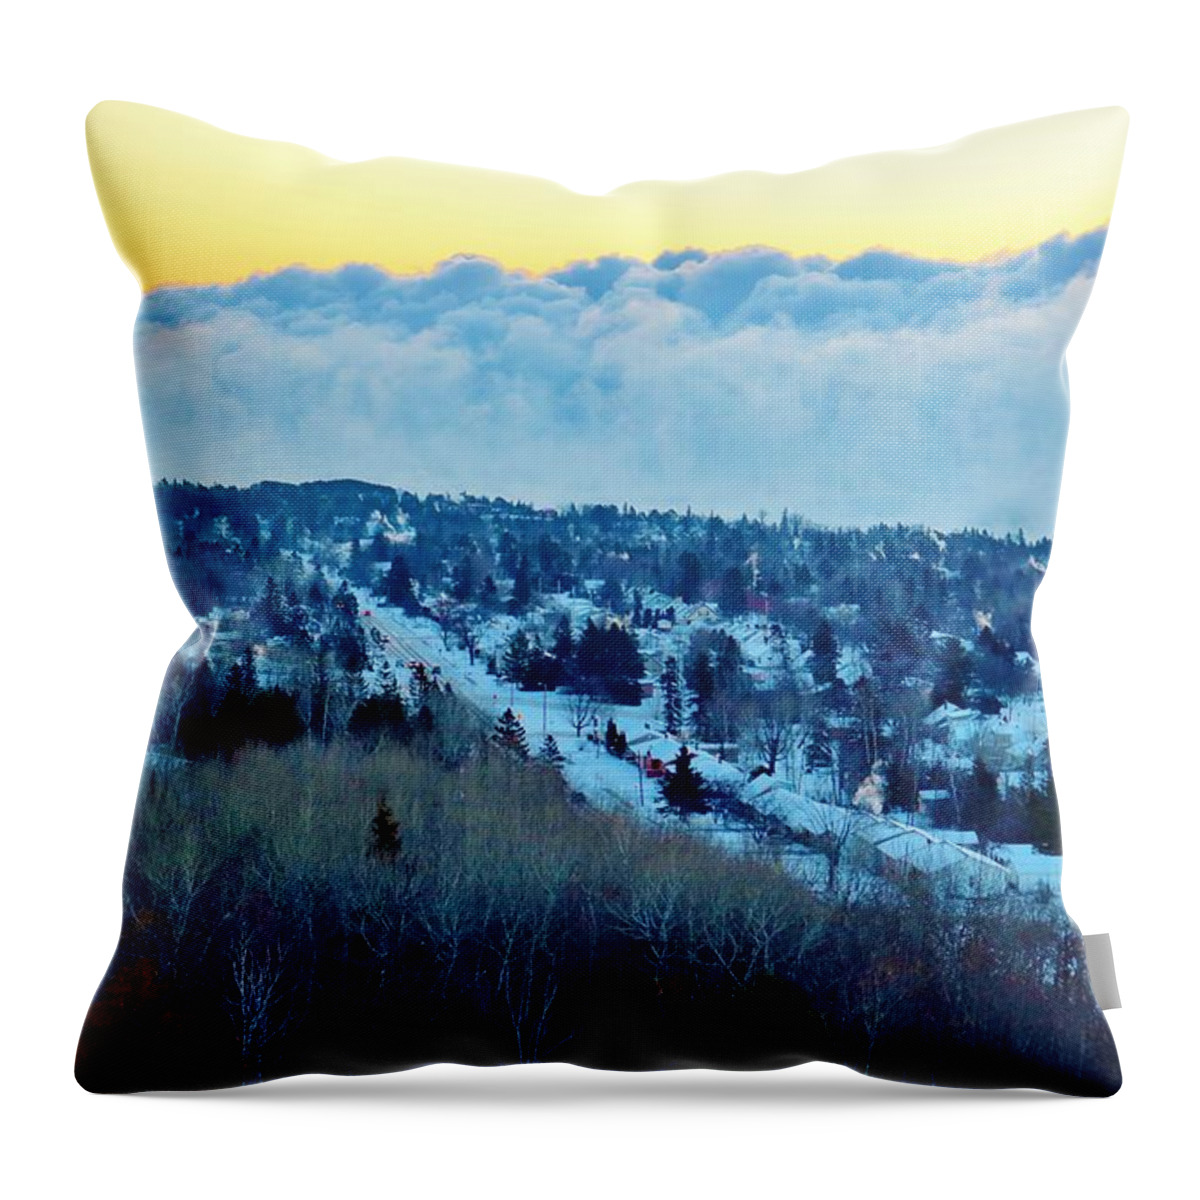  Throw Pillow featuring the photograph The Mist by Michelle Hauge